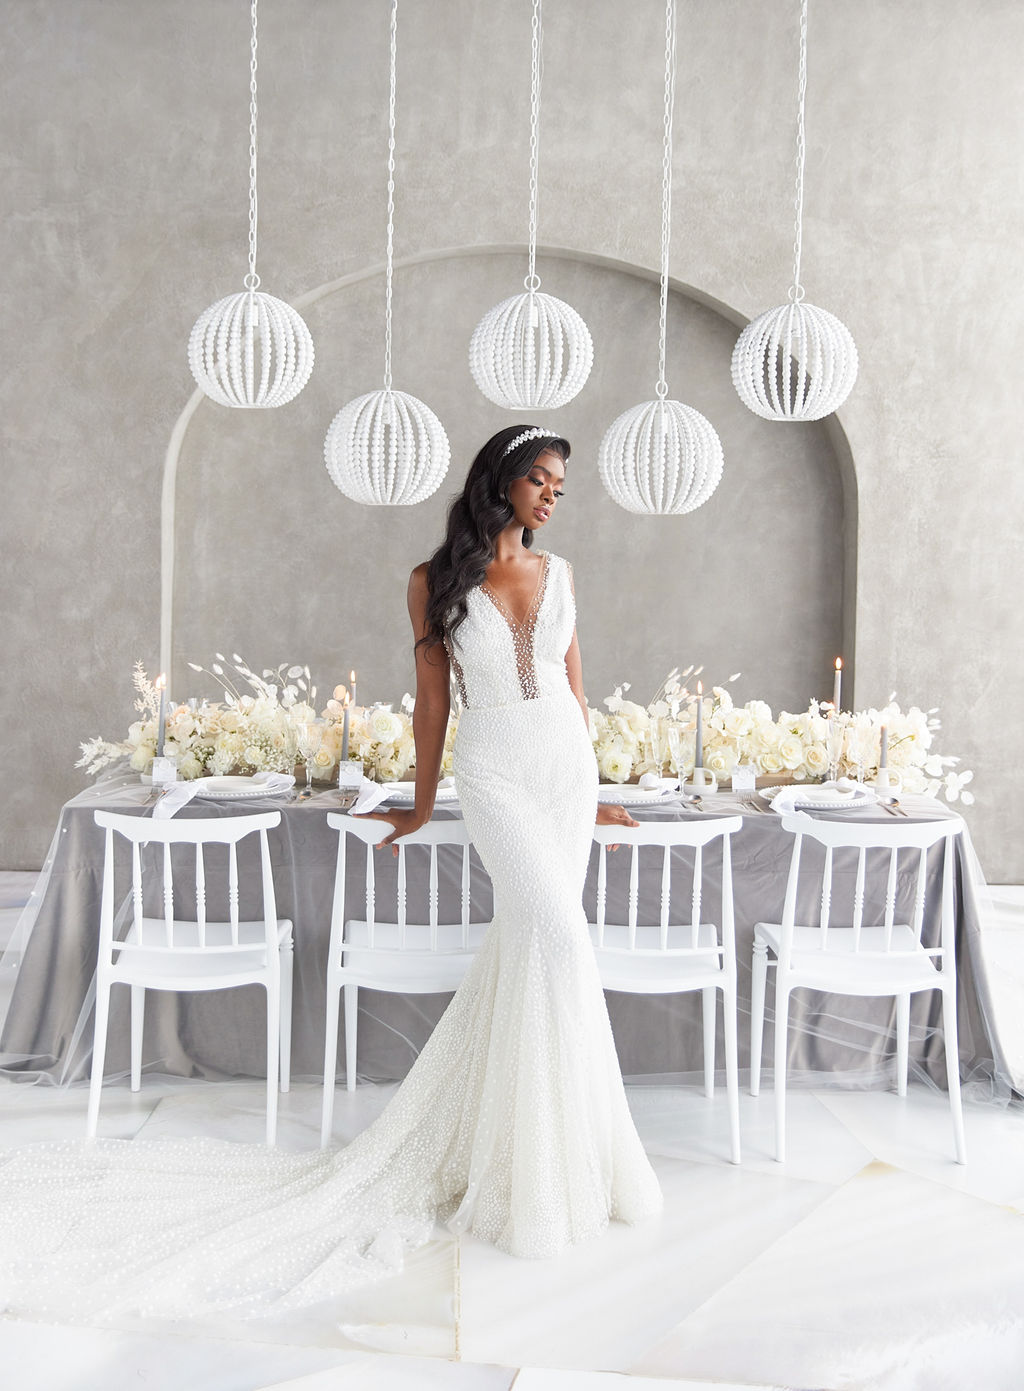 Bride posing in front of the wedding table with pearl decor pieces